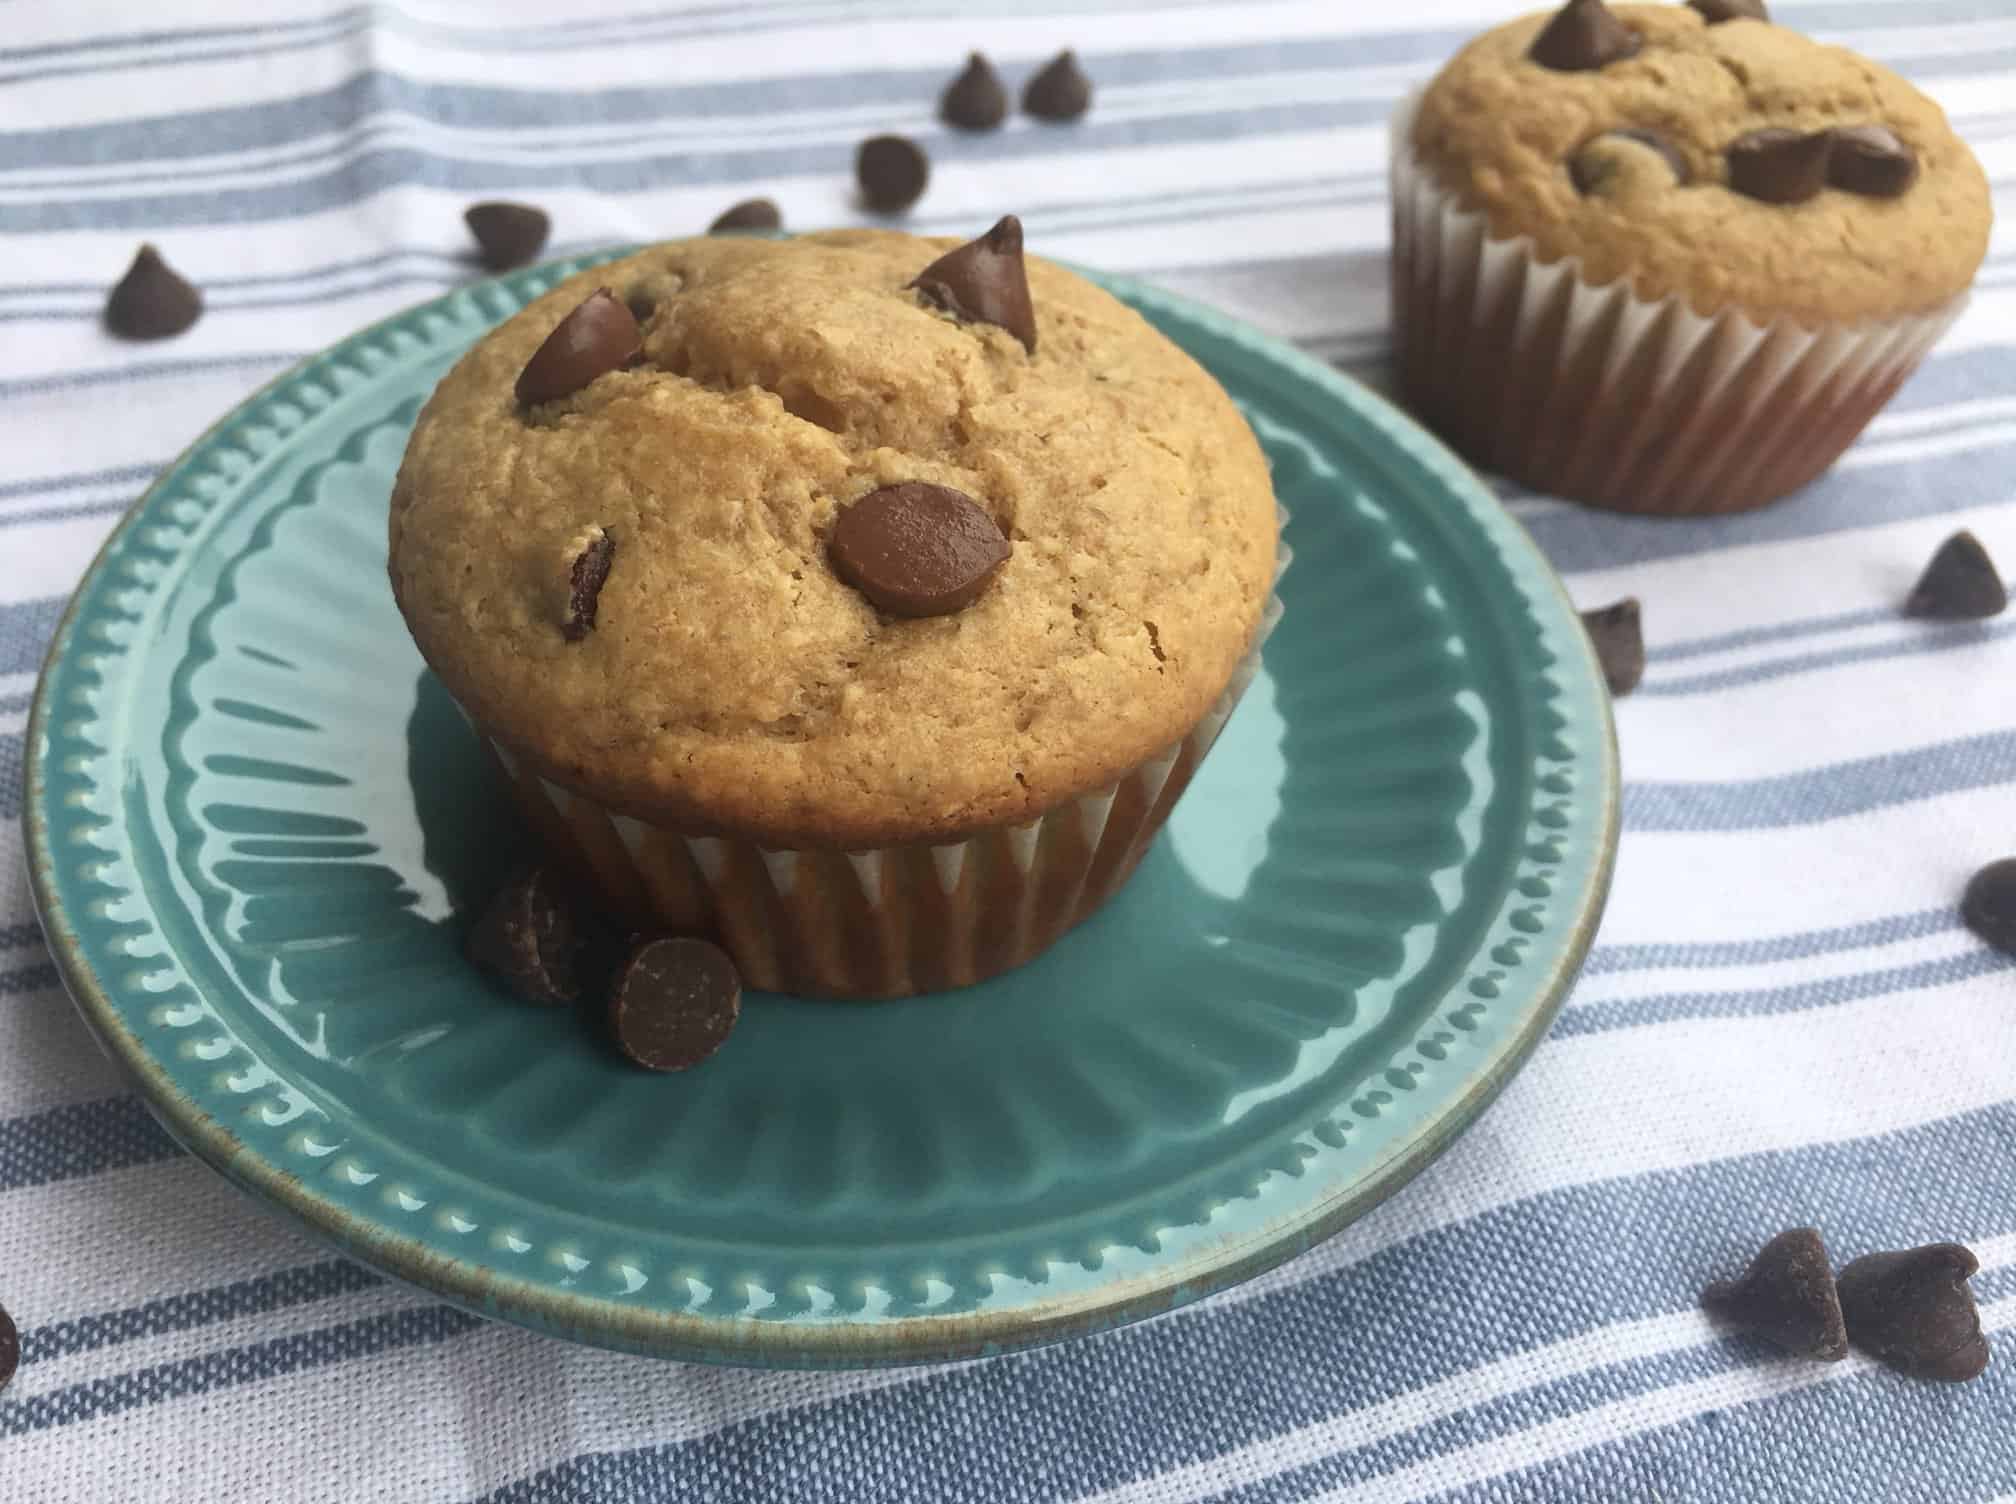 Chocolate chip peanut butter breakfast muffins on an antique blue plate with chocolate chips and another muffin in the background.